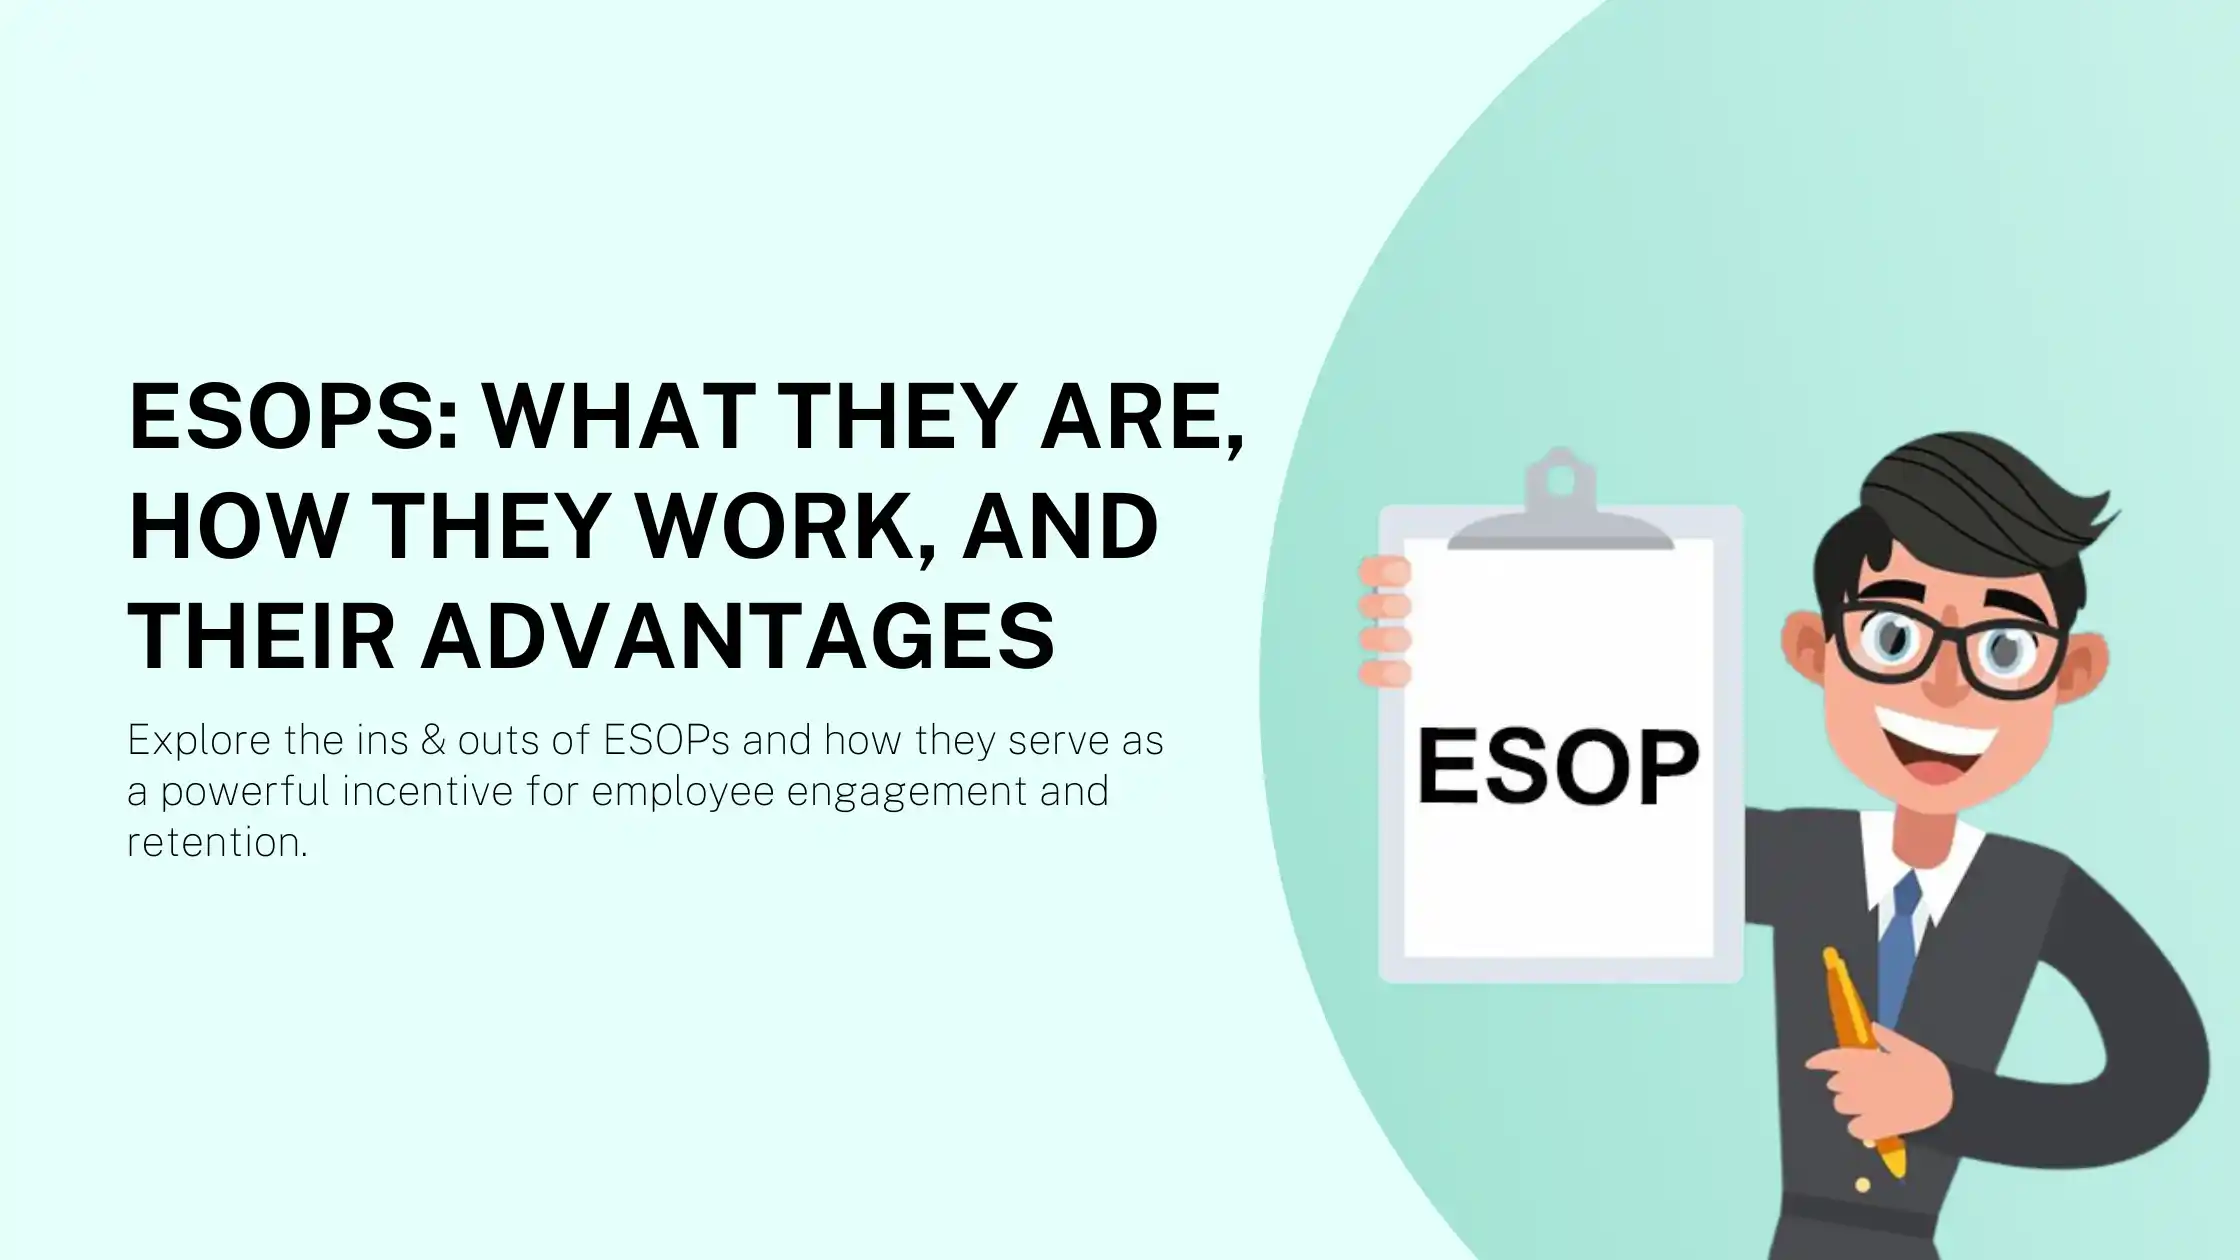 ESOPs: What They Are, How They Work, and Their Advantages